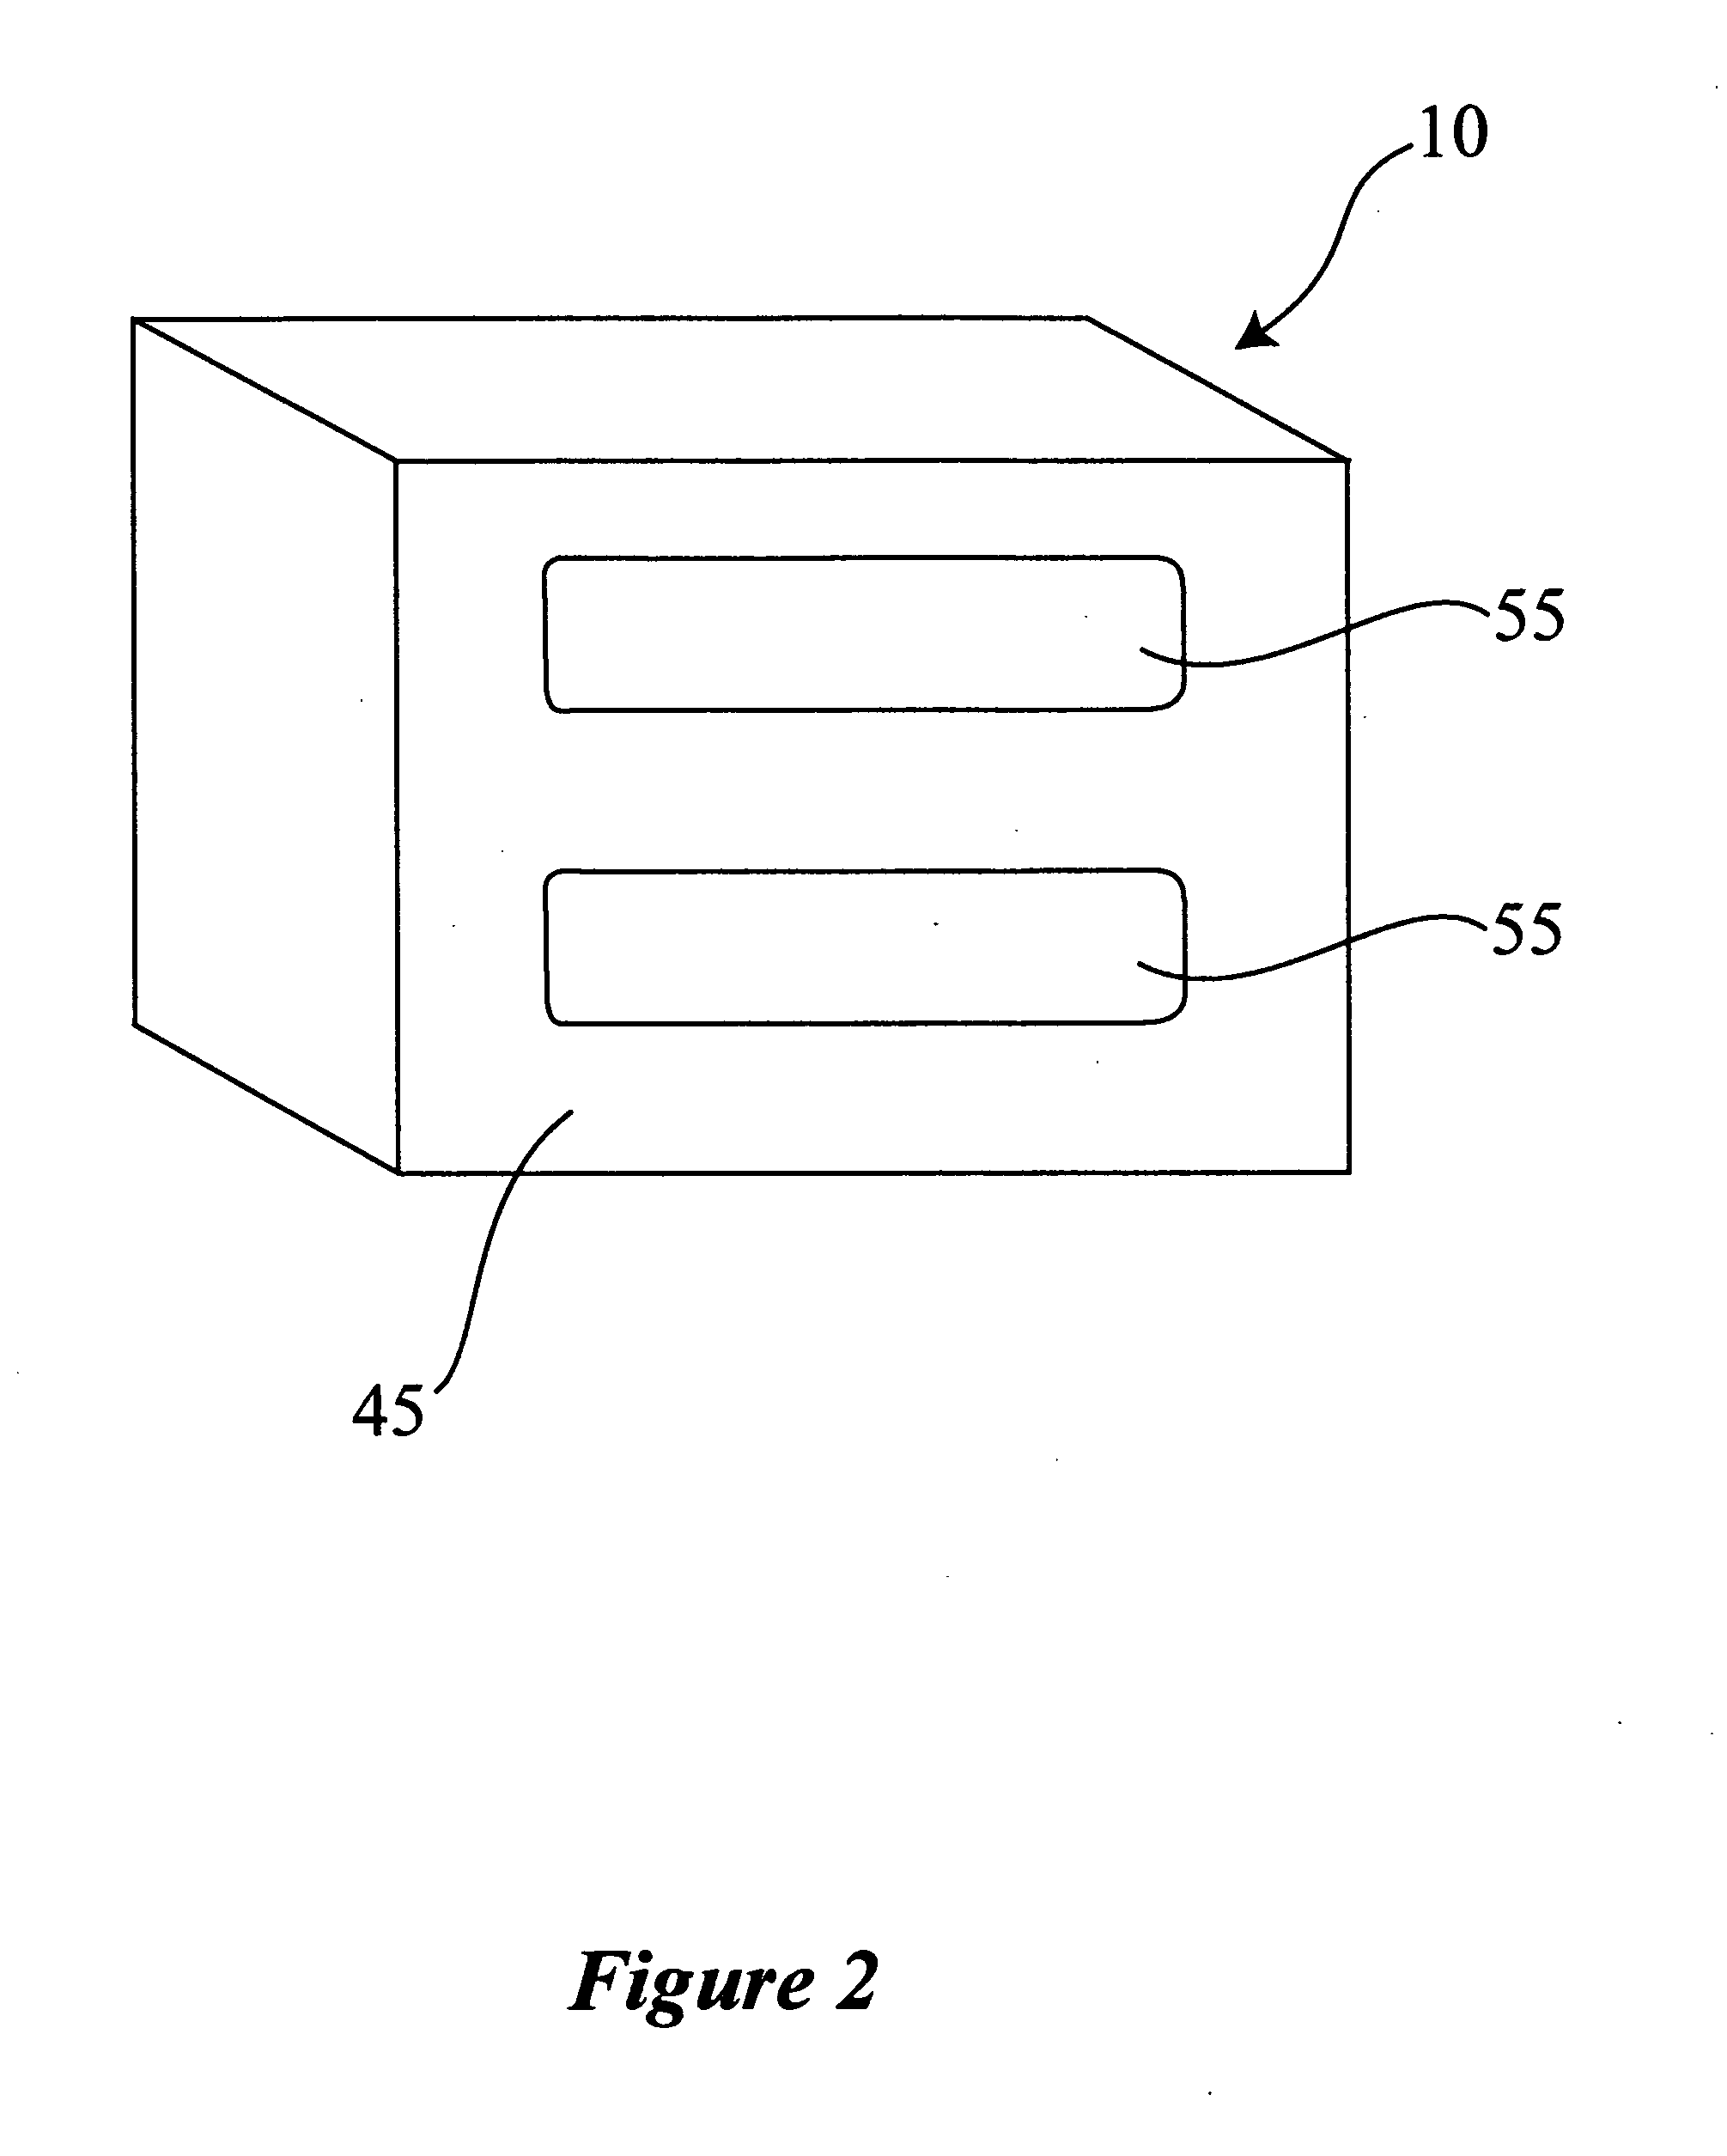 Label producing message center and personal shopping device